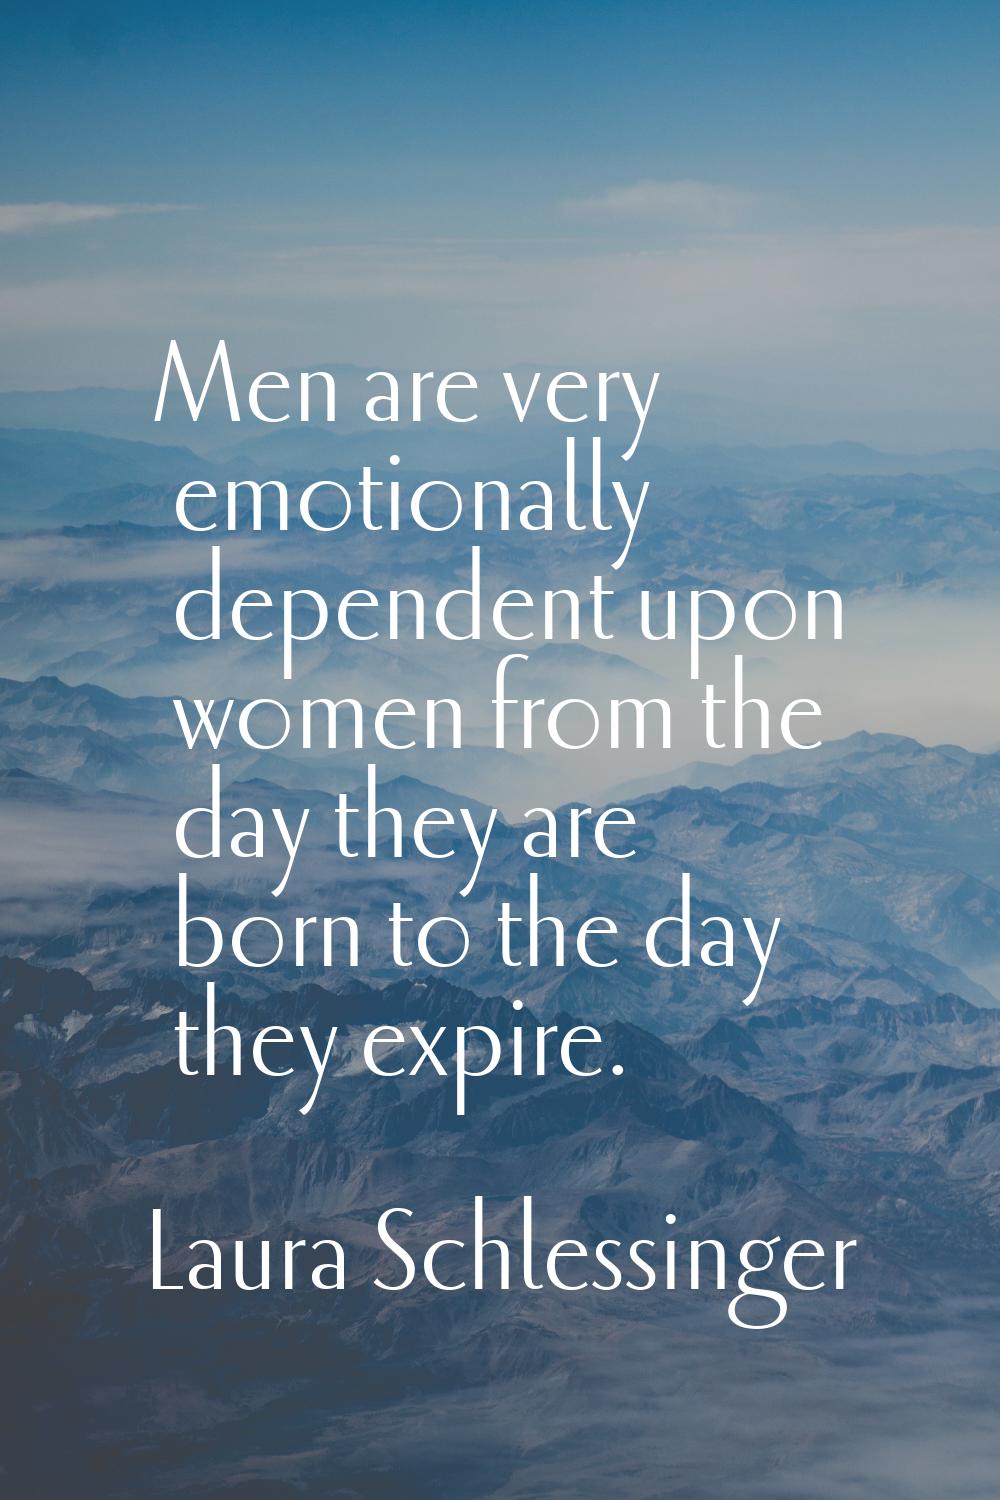 Men are very emotionally dependent upon women from the day they are born to the day they expire.